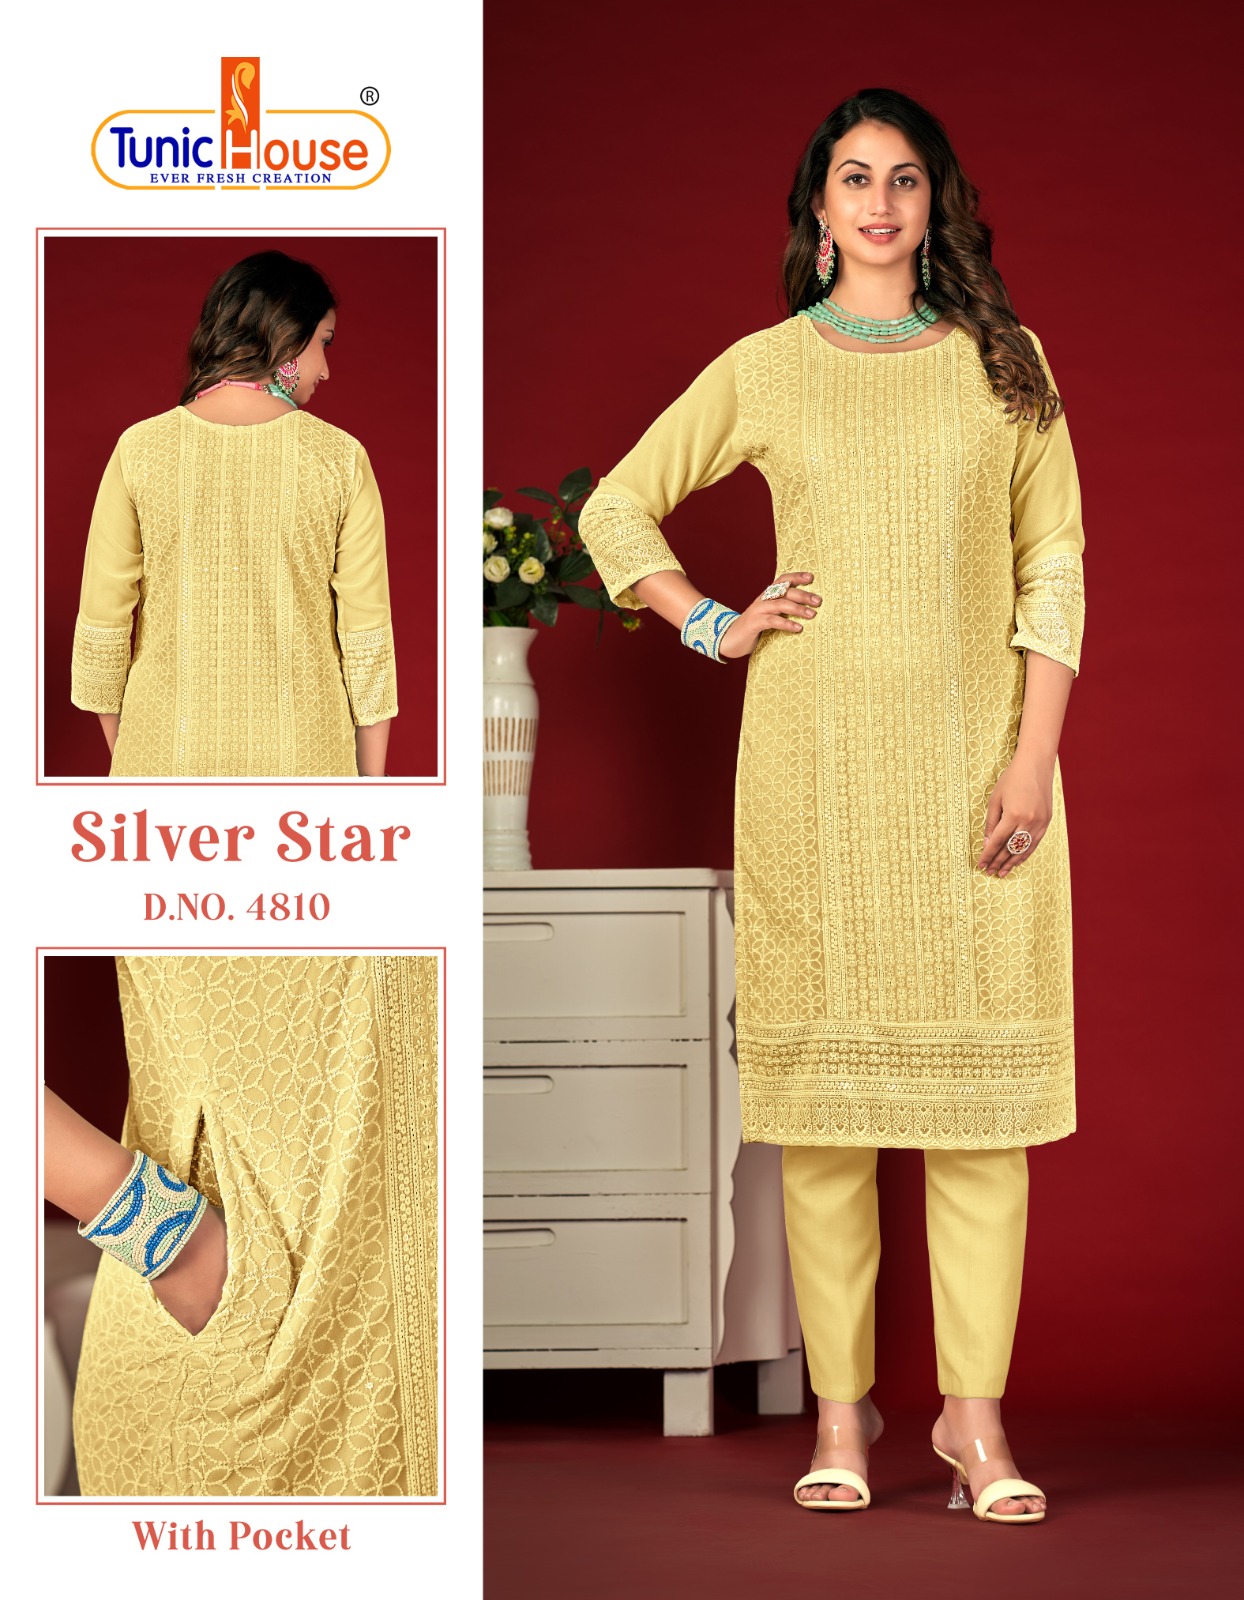 Tunic Houes Silver Star collection 2